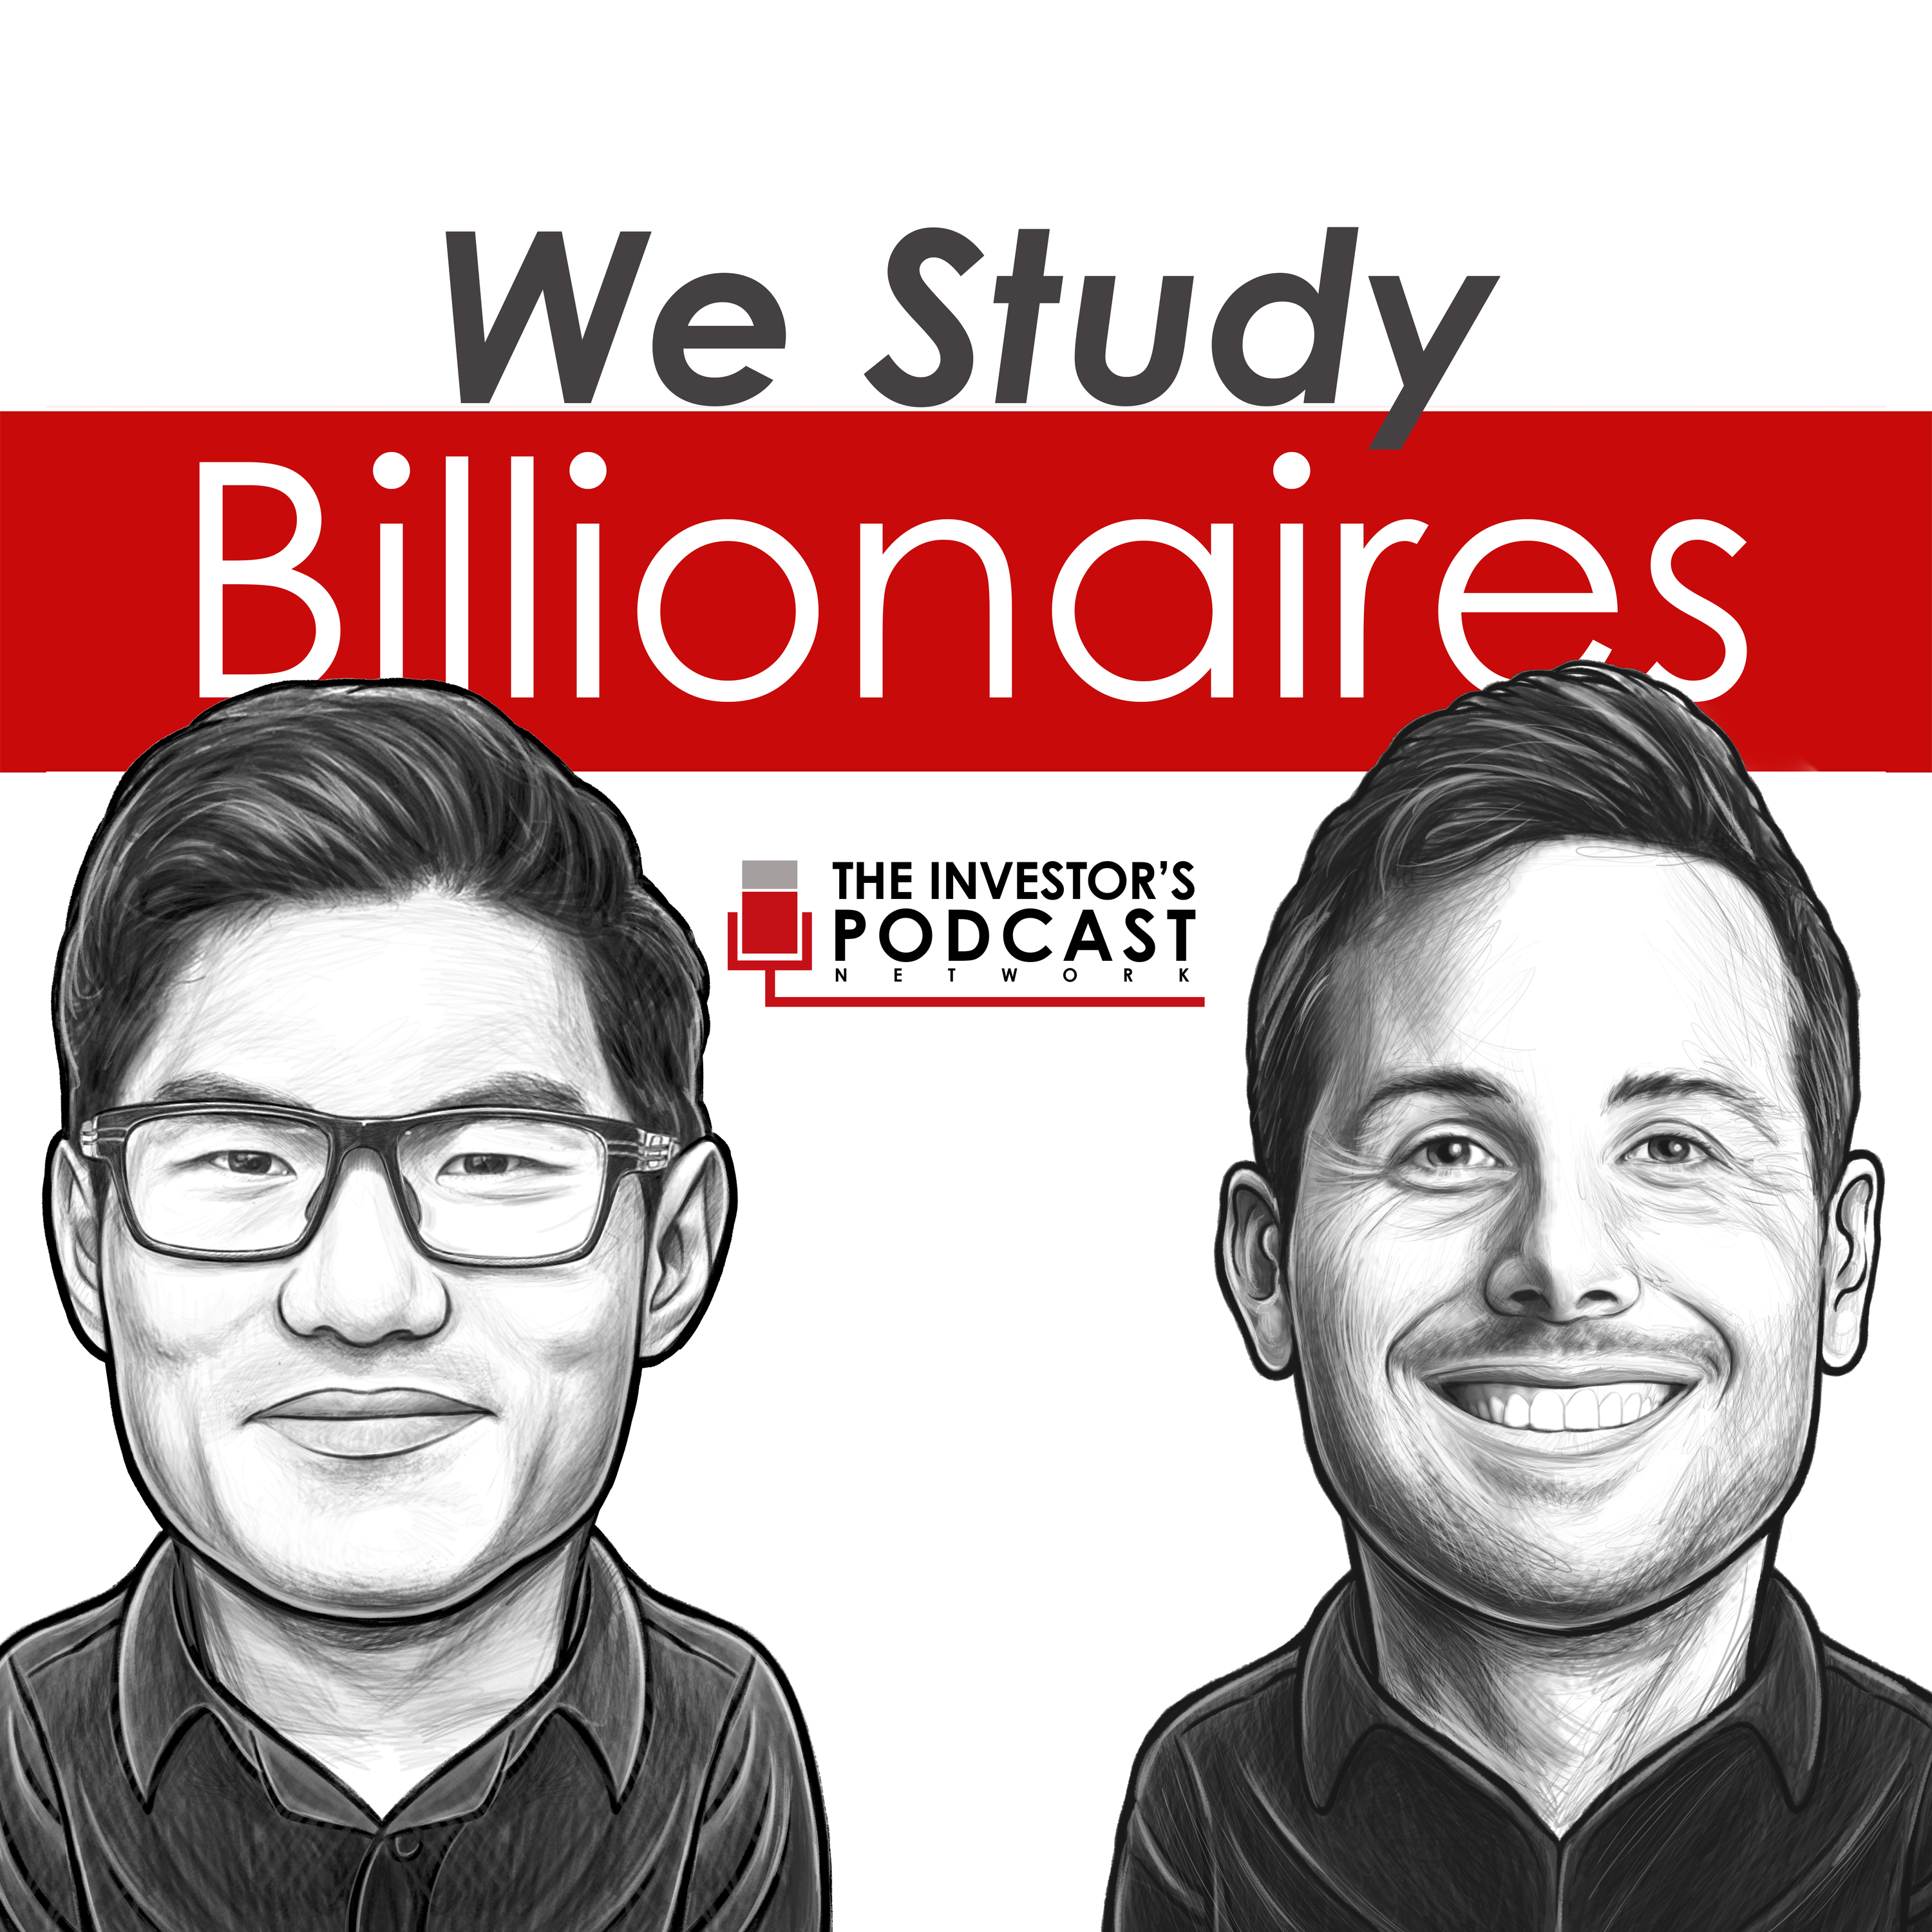 We Study Billionaires - The Investor’s Podcast Network podcast